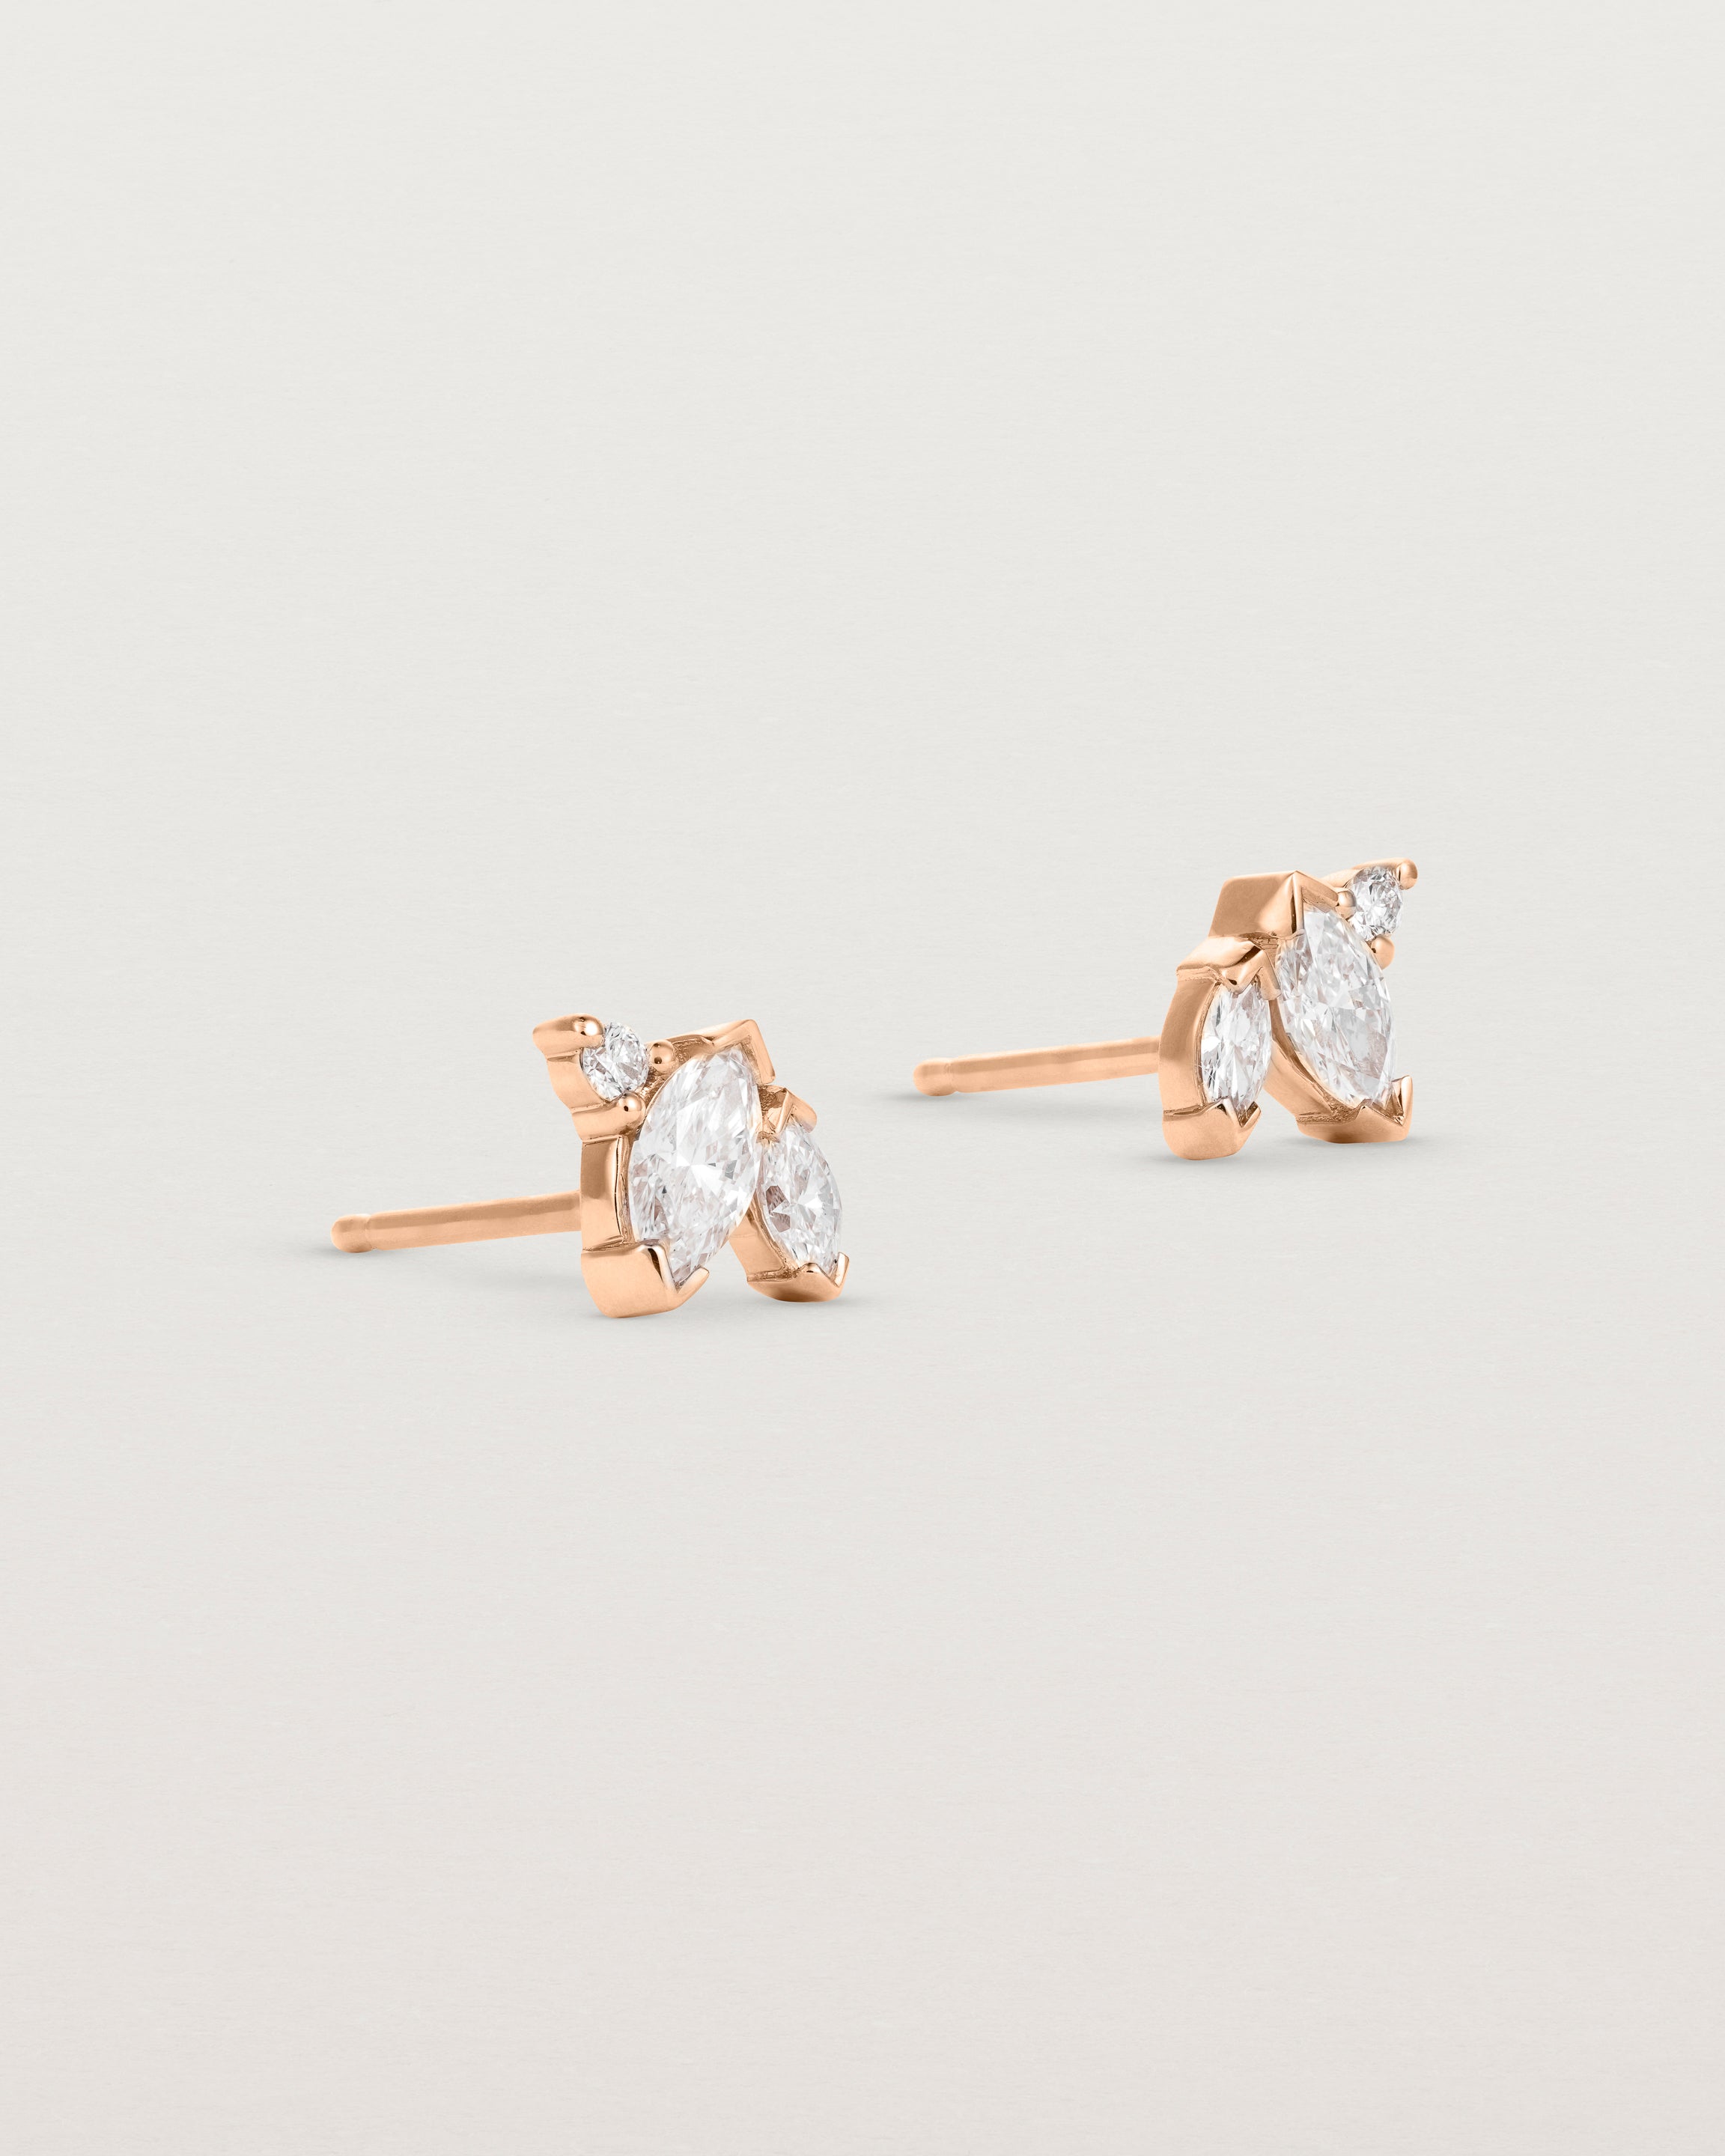 A pair of rose gold studs featuring two marquise and one round diamond